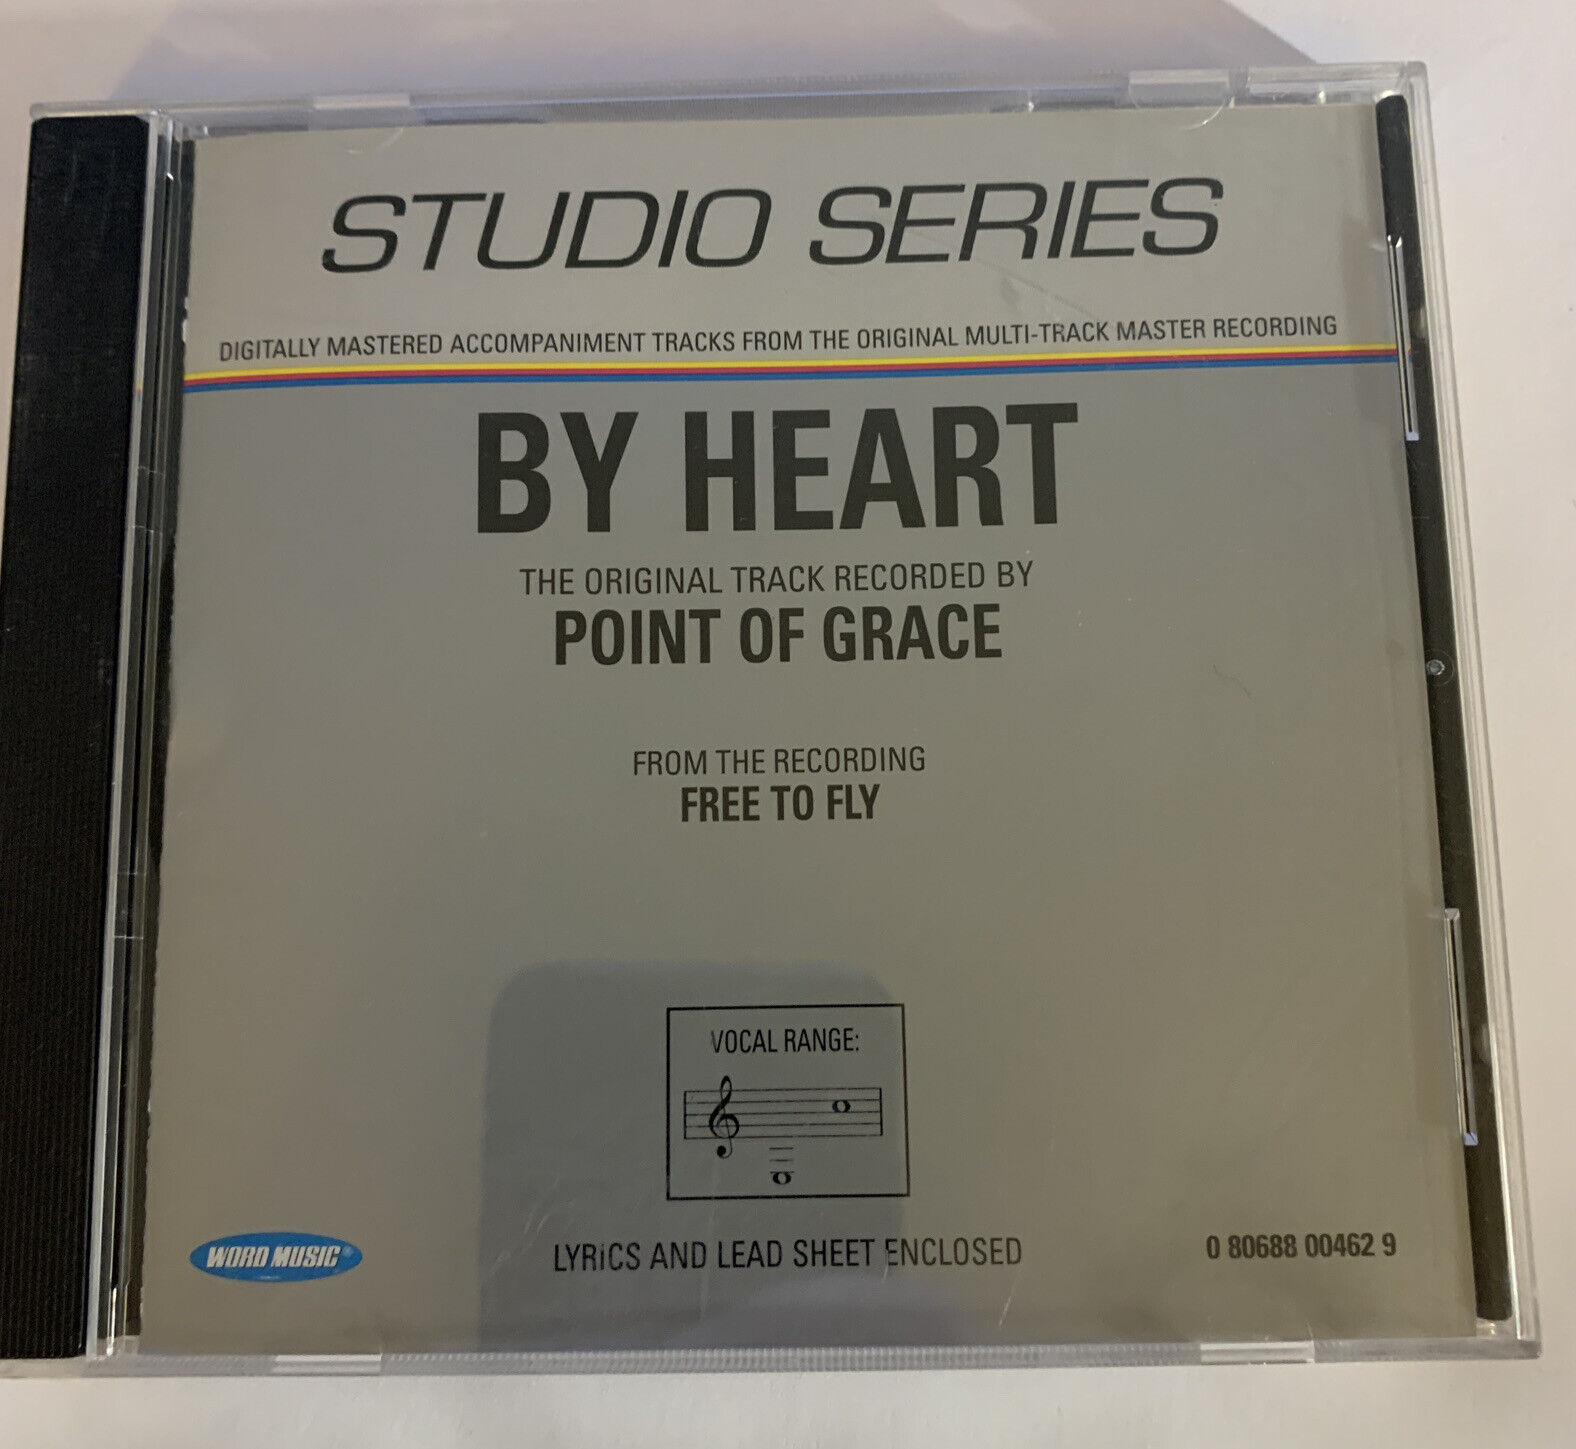 By Heart - Point of Grace - Free to Fly Studio Series CD 2001 - Free Shipping